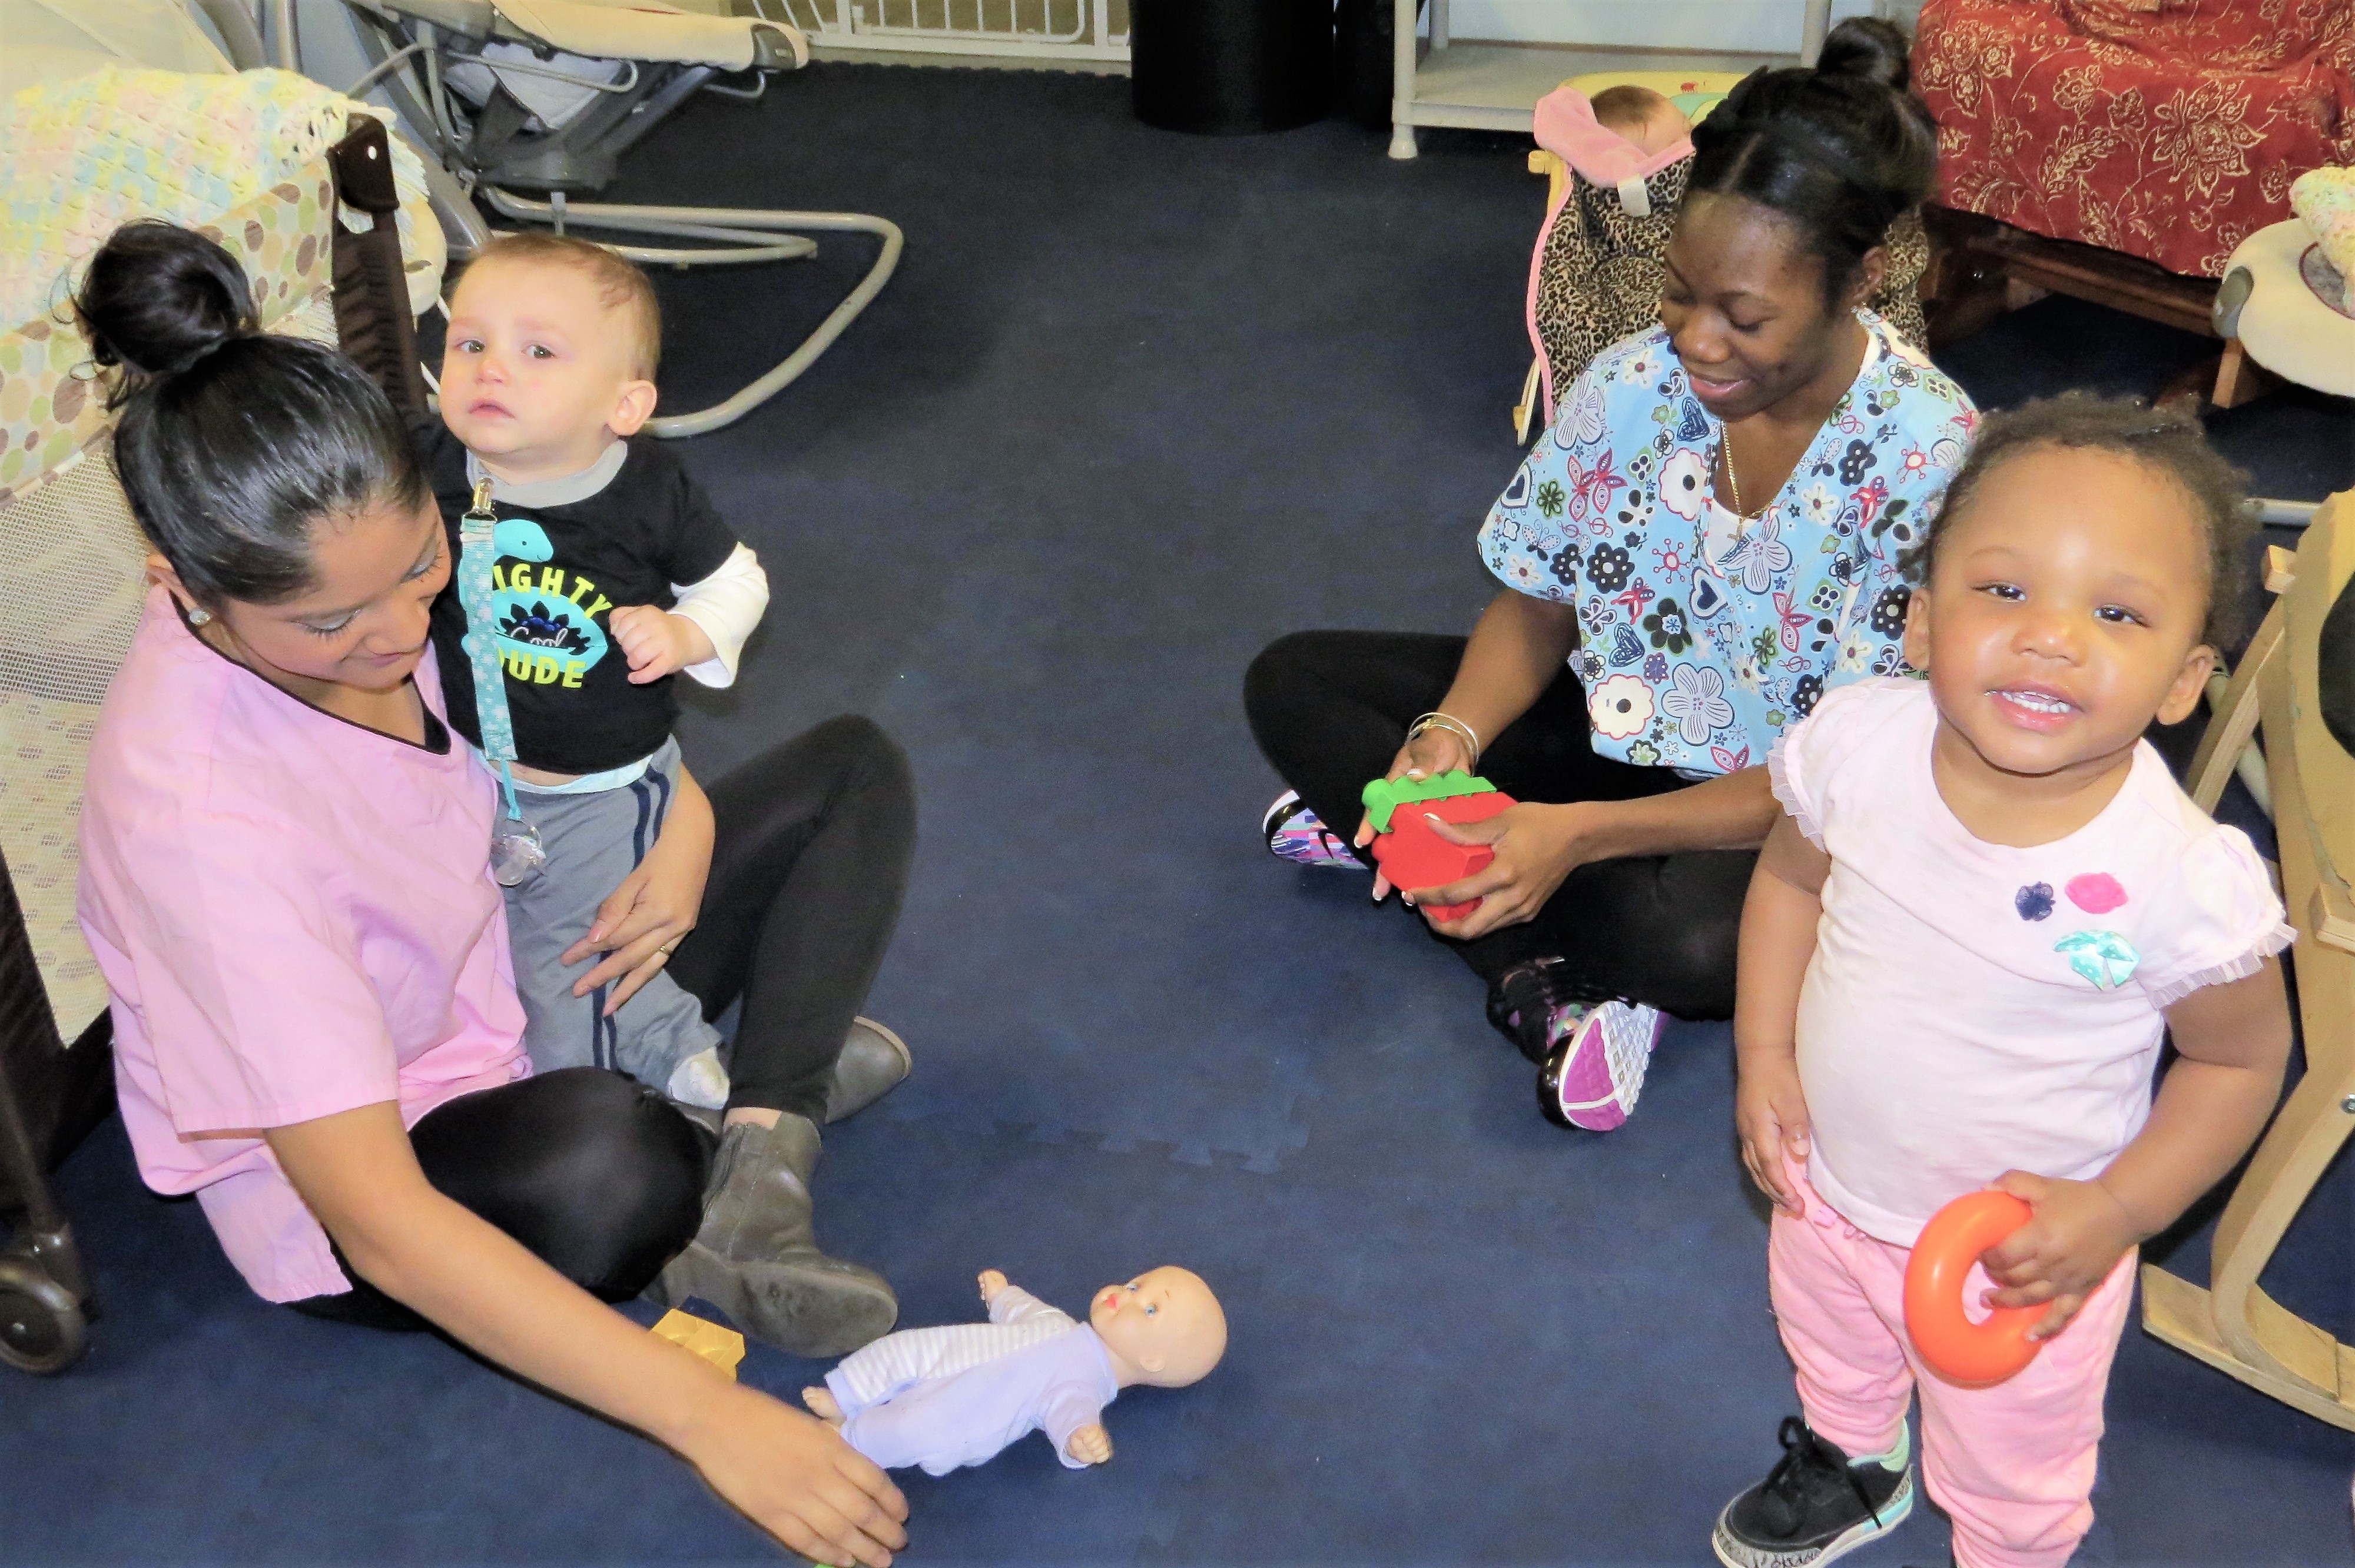 The childcare program at Eva's Village provides care for infants and toddlers throughout the day and after-school care for older children, allowing their mothers to focus on their own recovery.